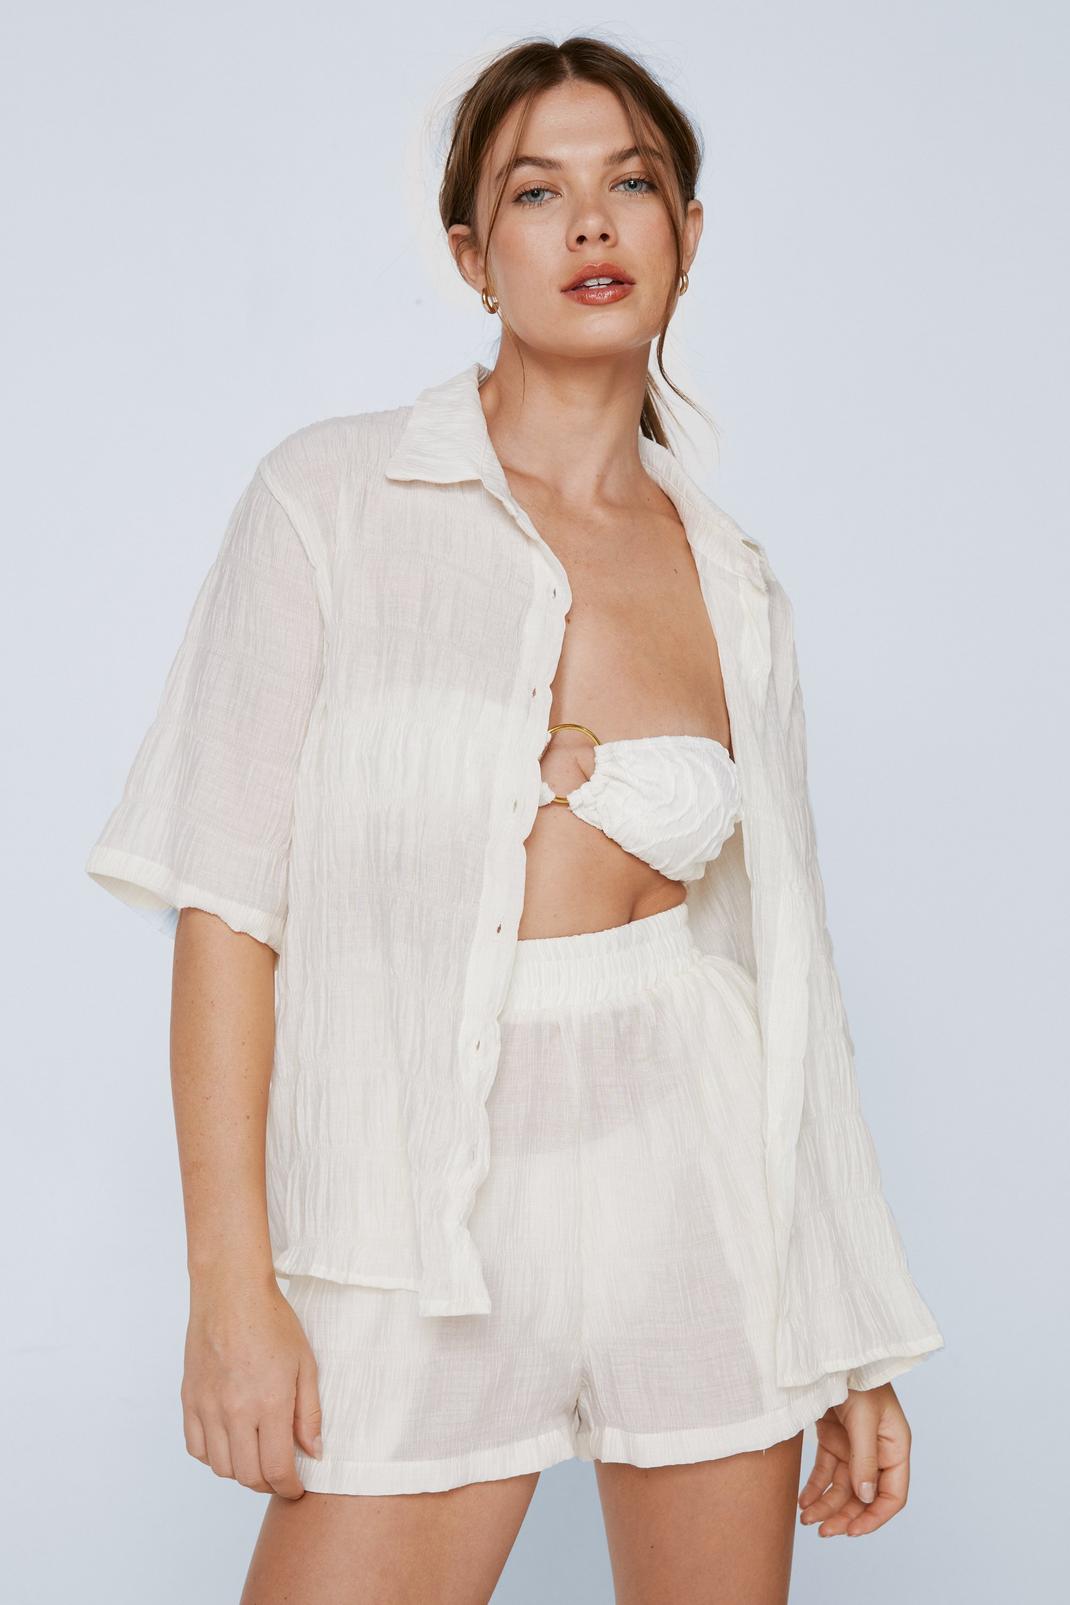 Bralette Shirt and Shorts 3pc Beach Cover Up Set